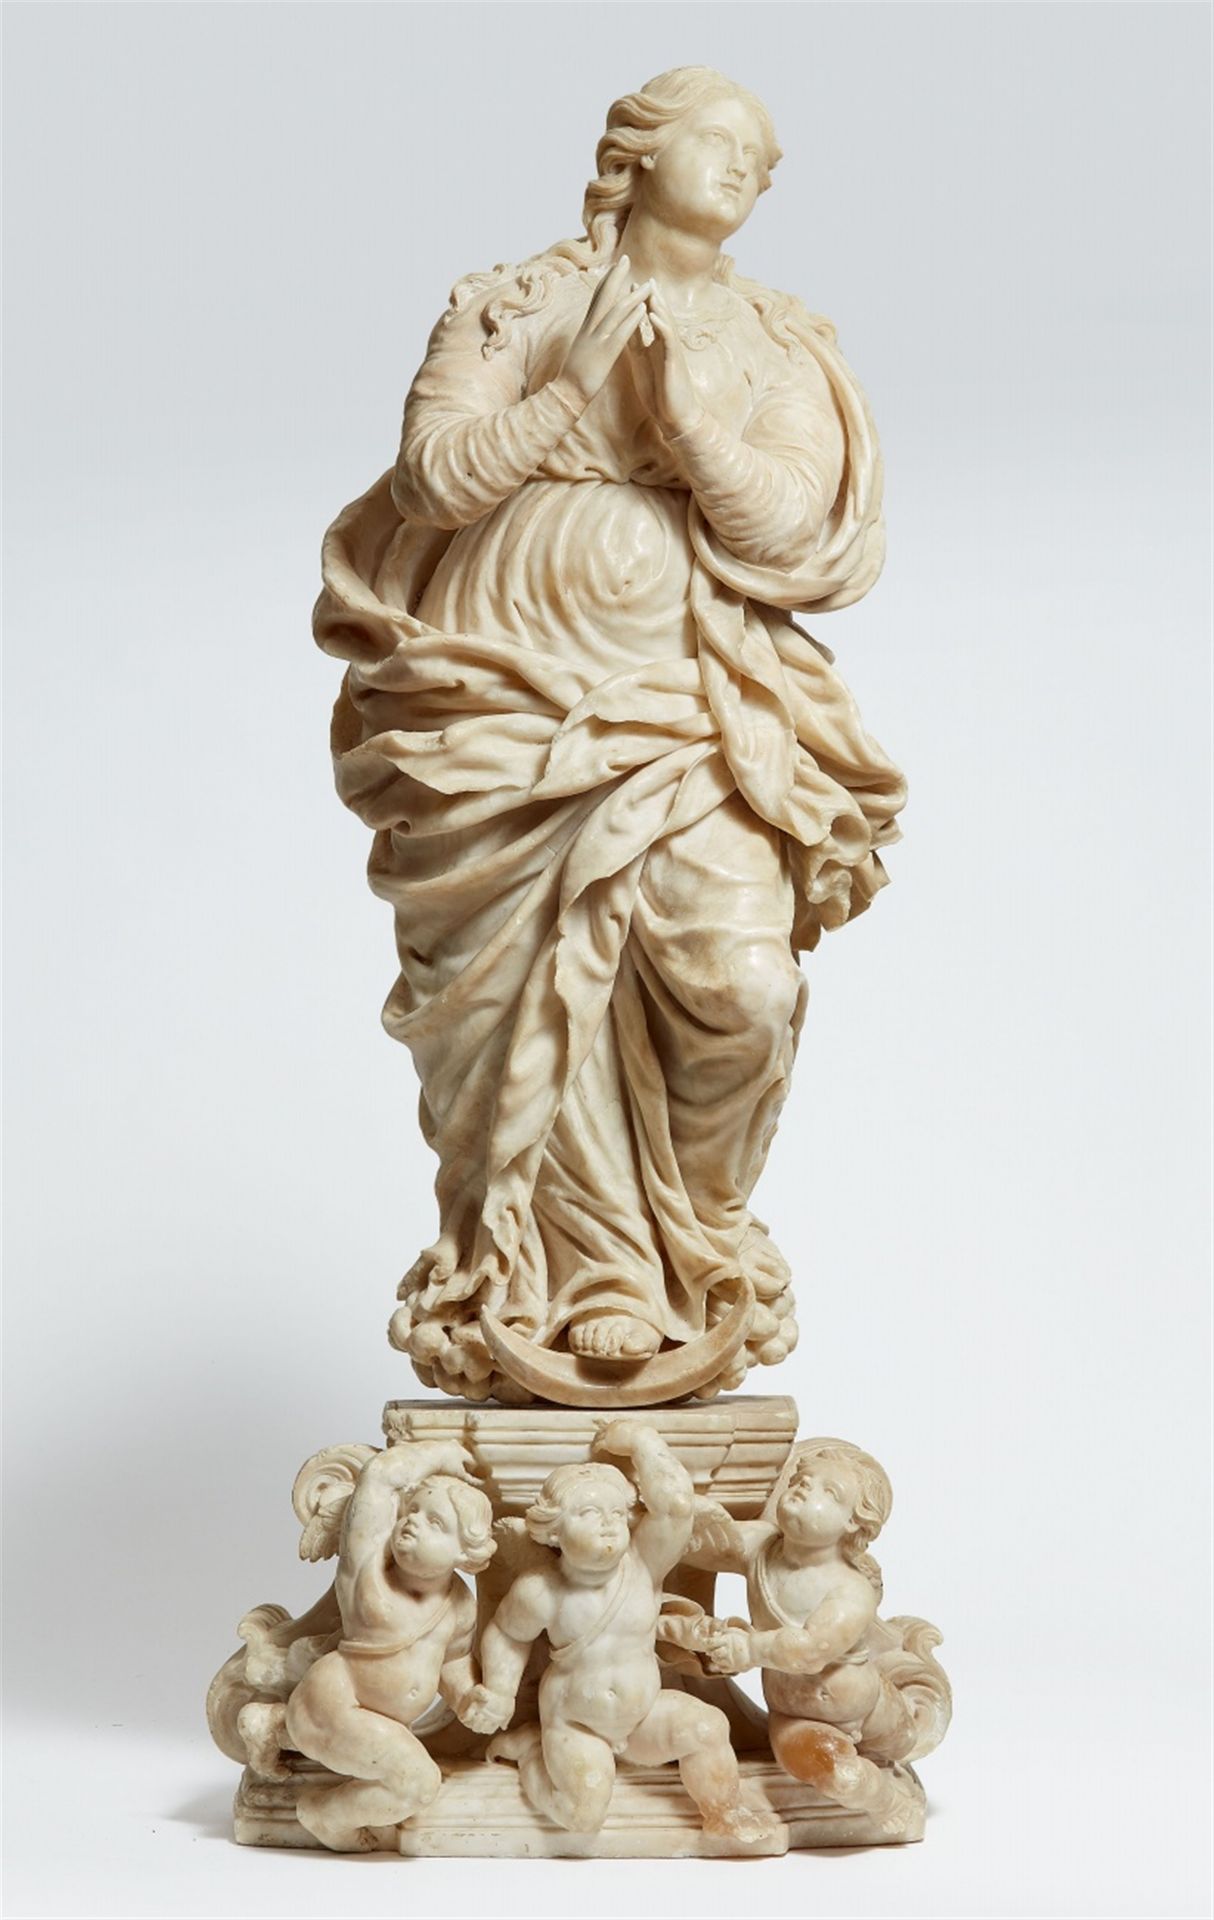 An alabaster figure of the Madonna Immaculata